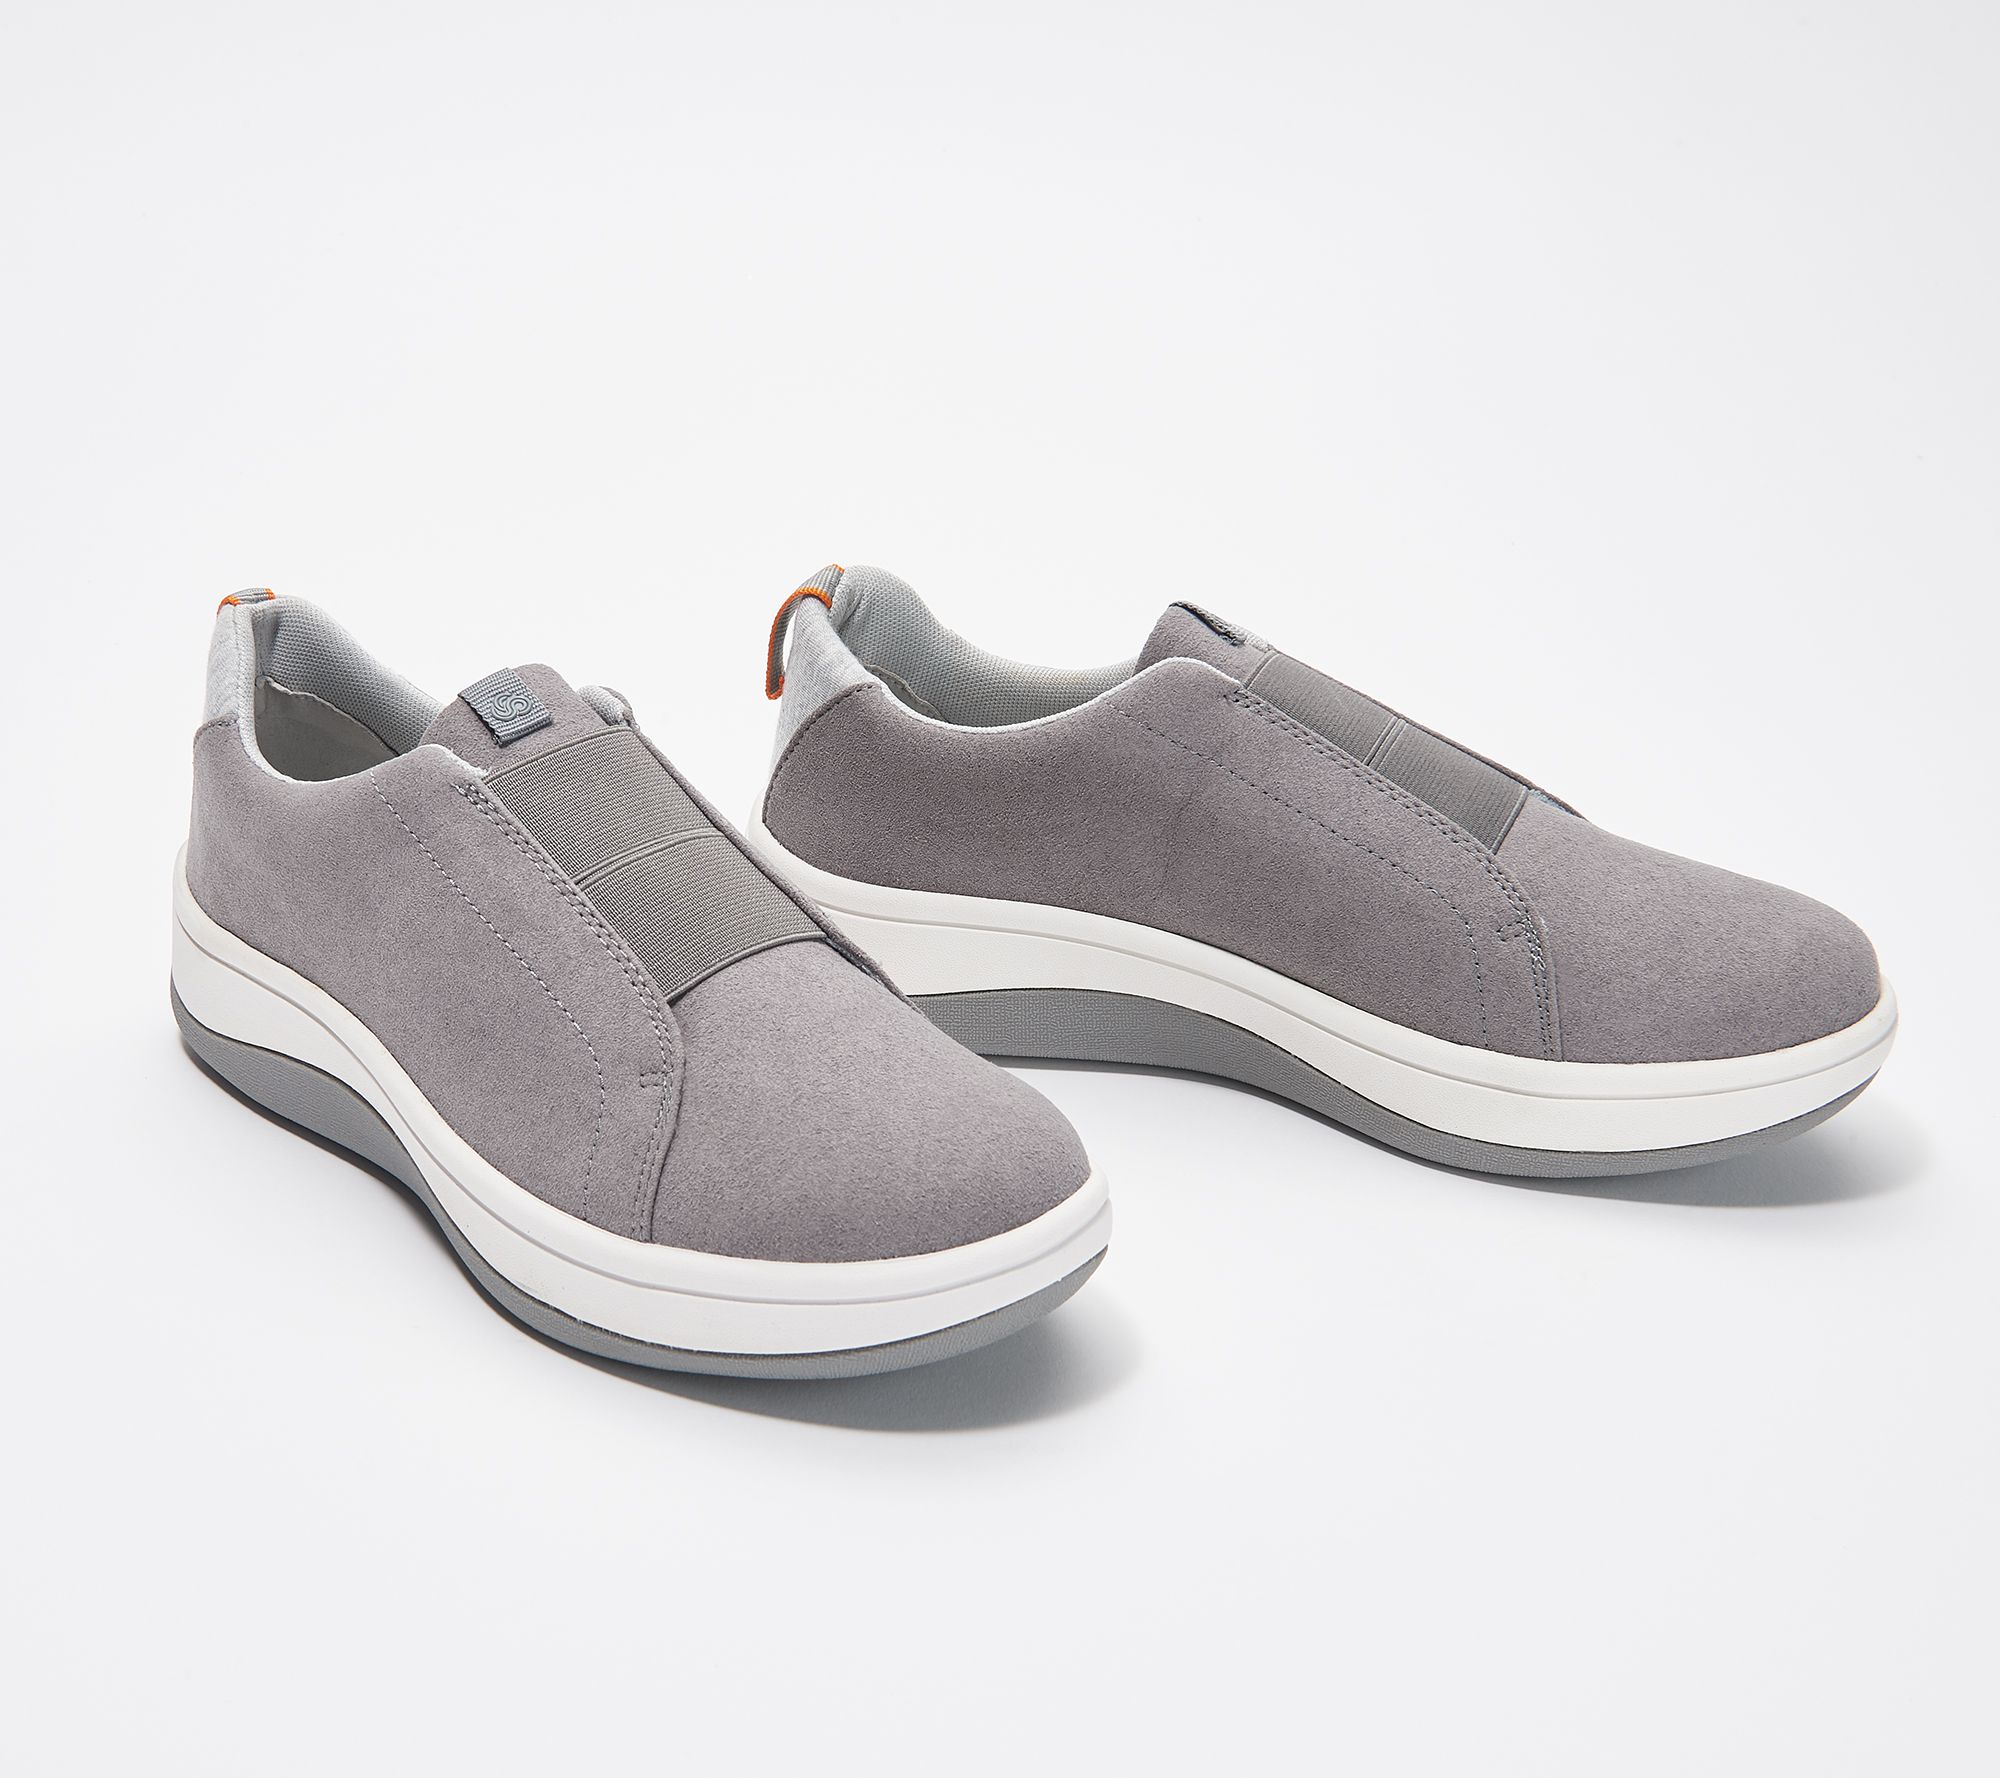 clarks cloudsteppers gray